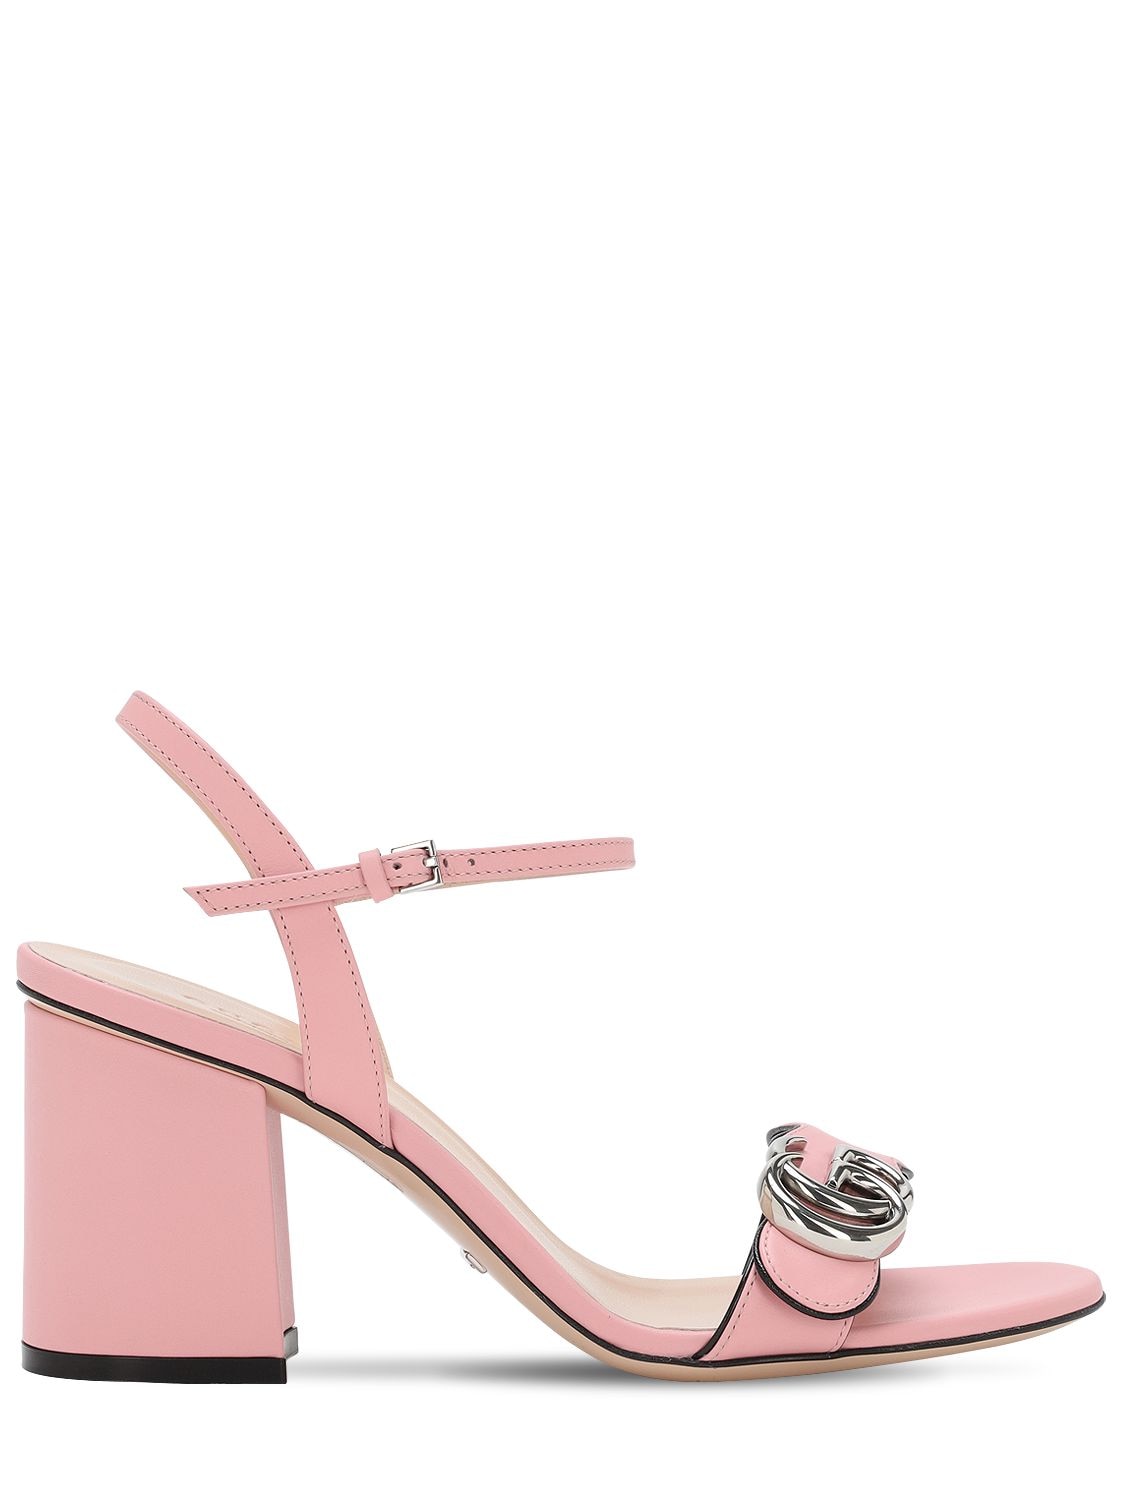 Gucci 75mm Marmont Leather Sandals In Light Pink